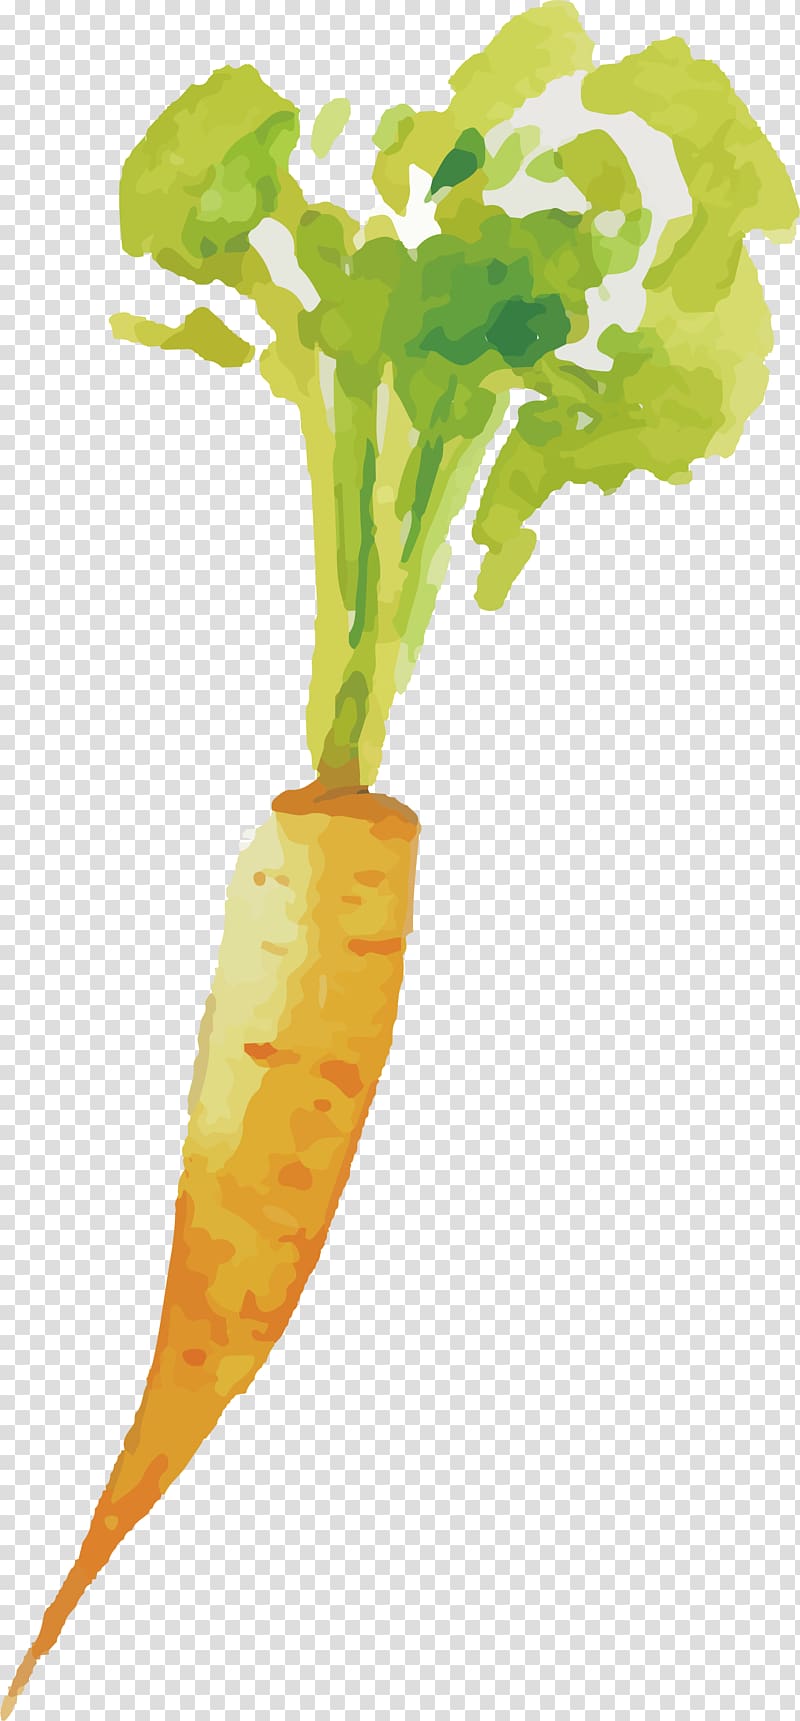 Carrot Vegetable, Painted carrot transparent background PNG clipart